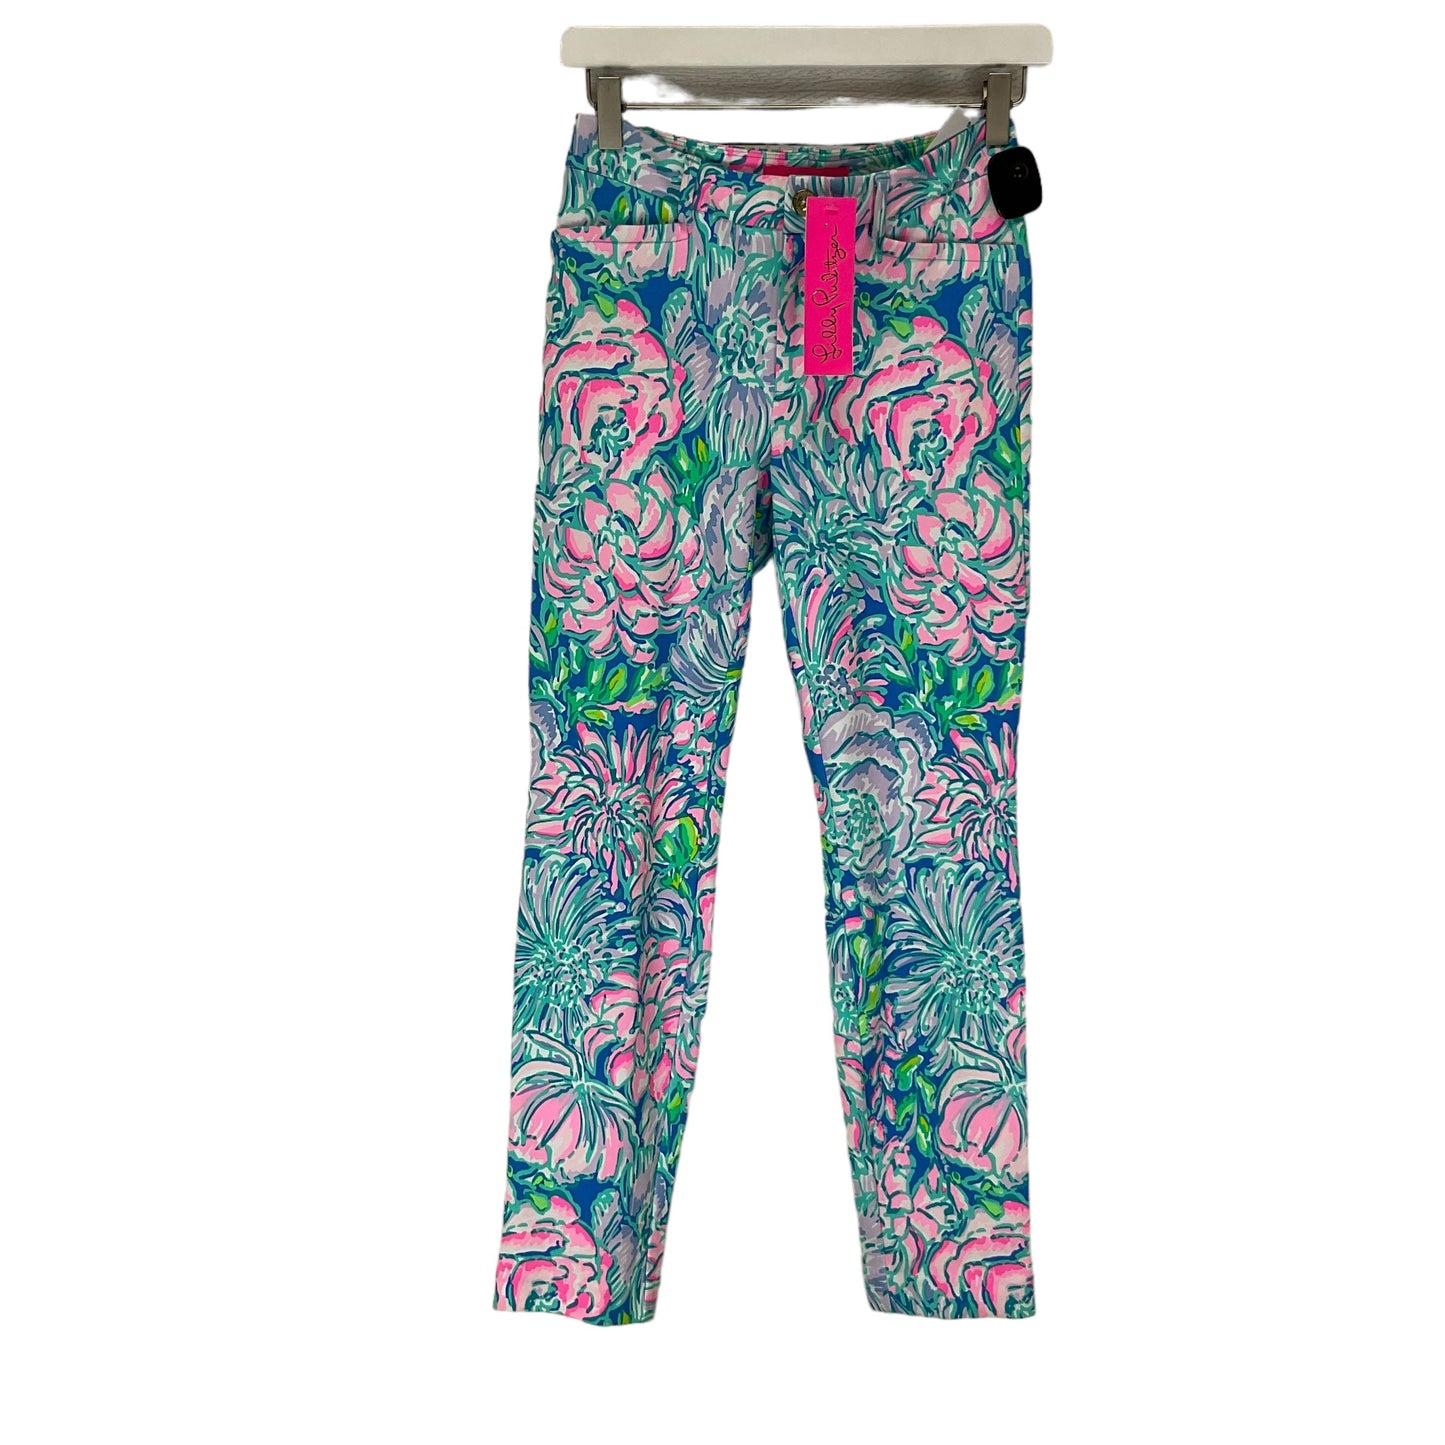 Multi-colored Pants Designer Lilly Pulitzer, Size 0